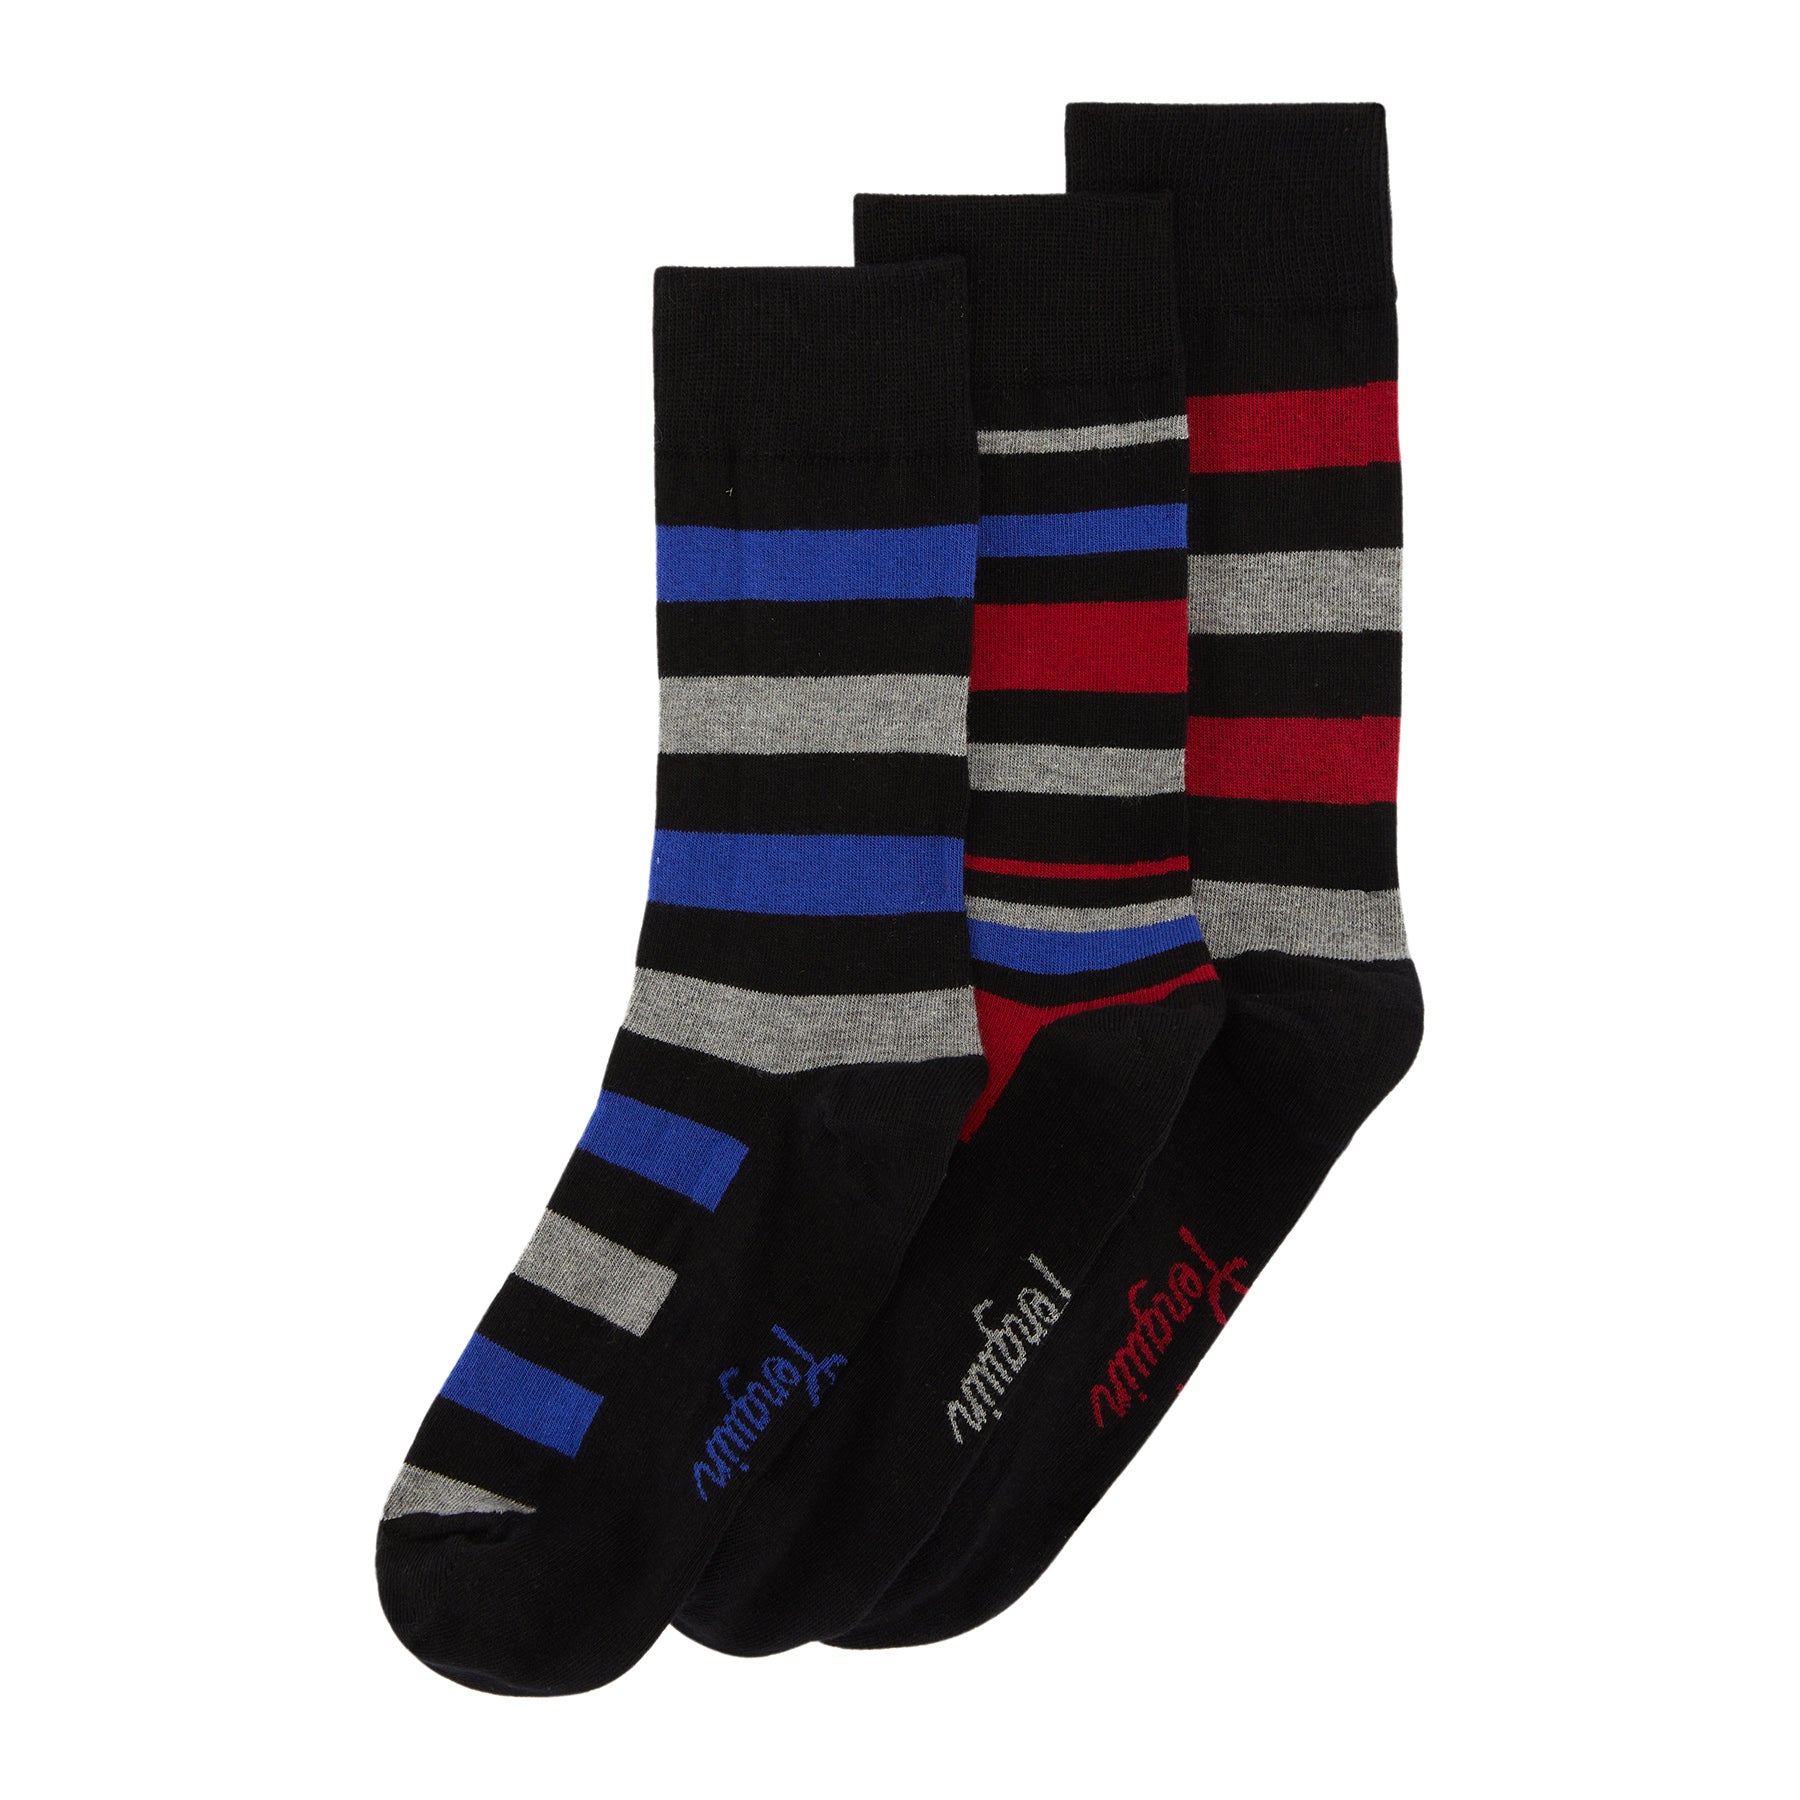 View 3 Pack Stripe Design Ankle Socks In Black Blue And Red information